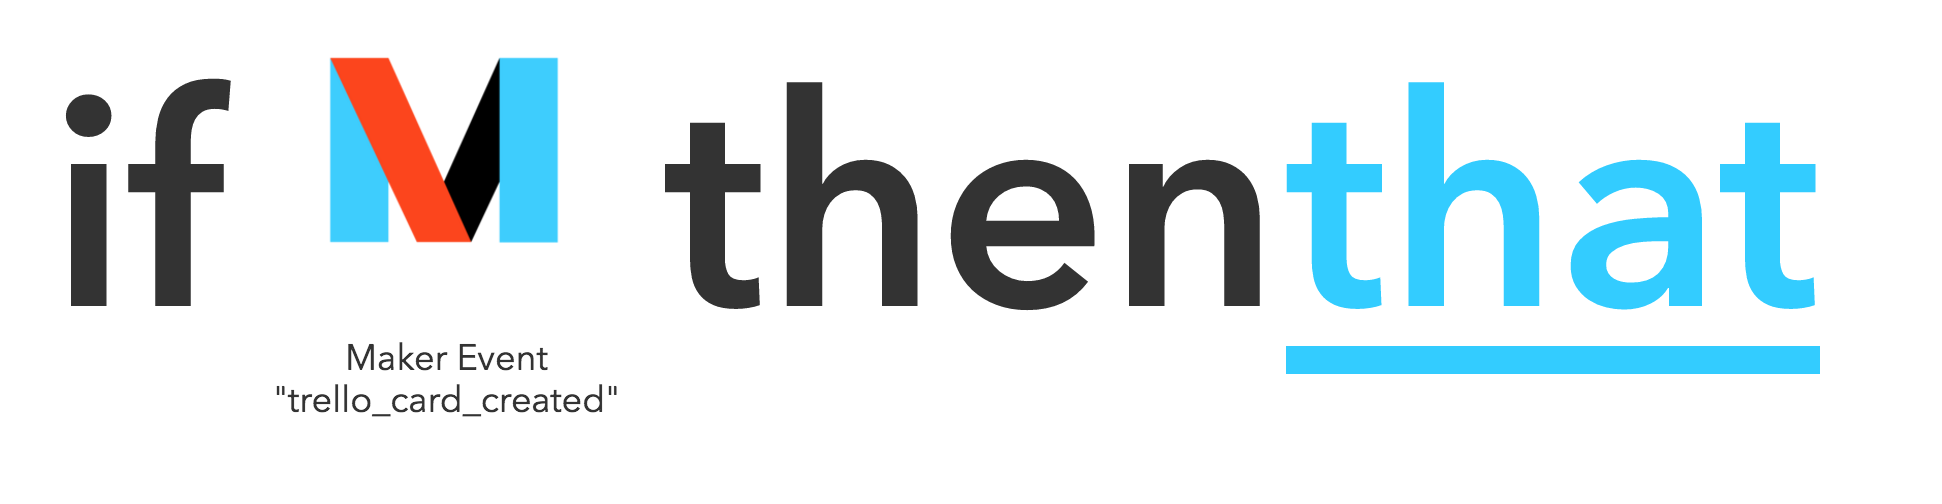 Image of ifMakerThenThat